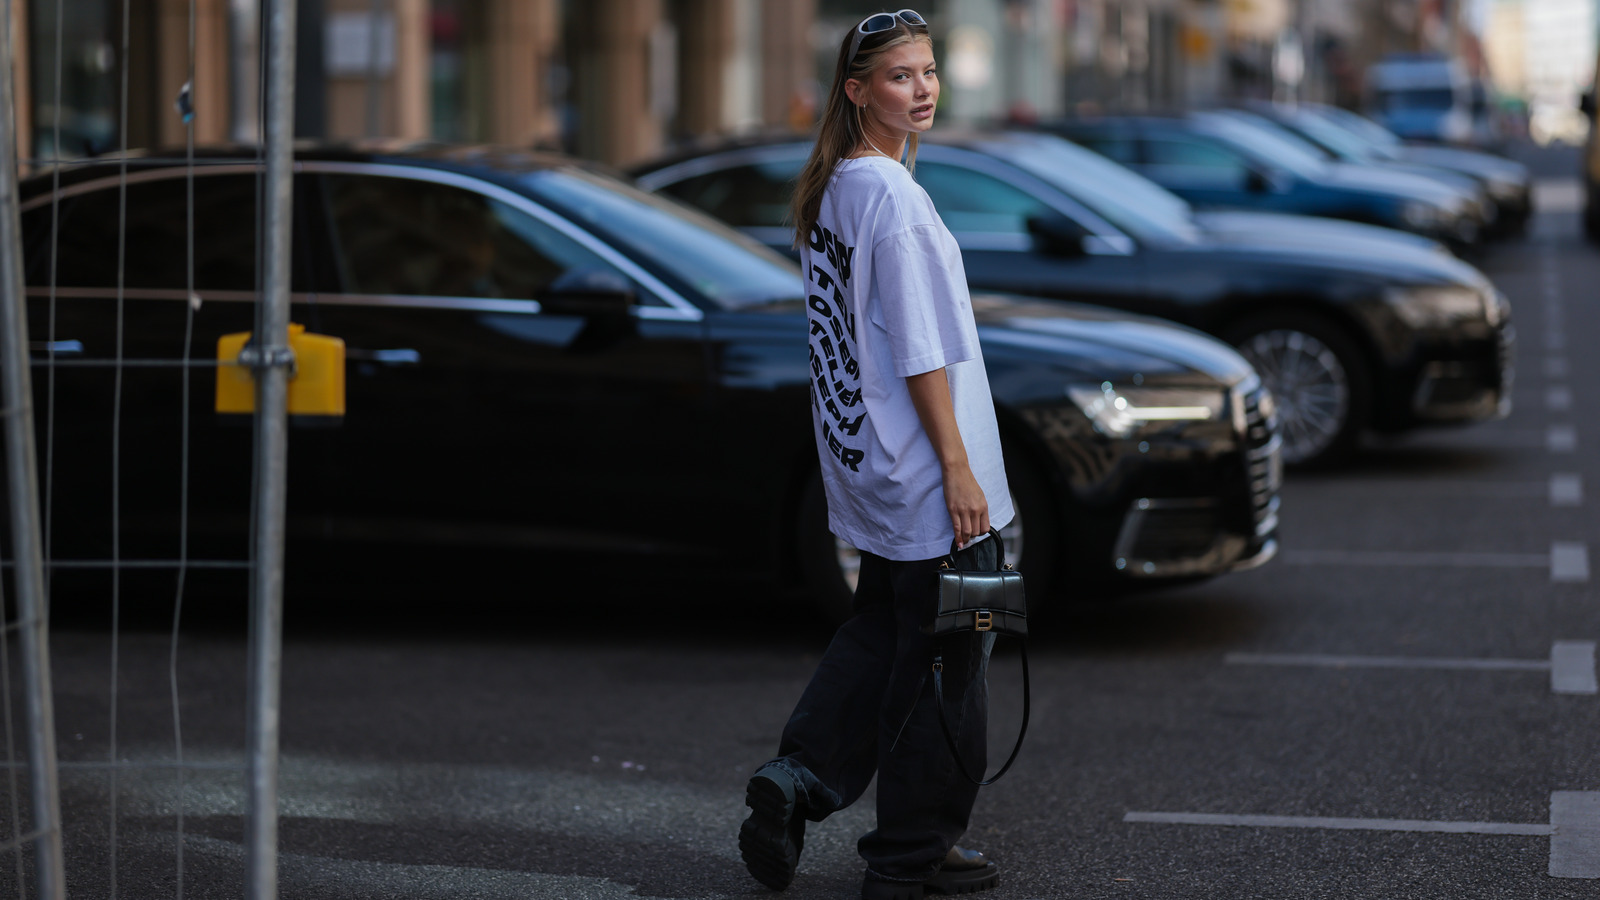 Styling Baggy Clothes For A Flattering Fit Is Possible. Here's How